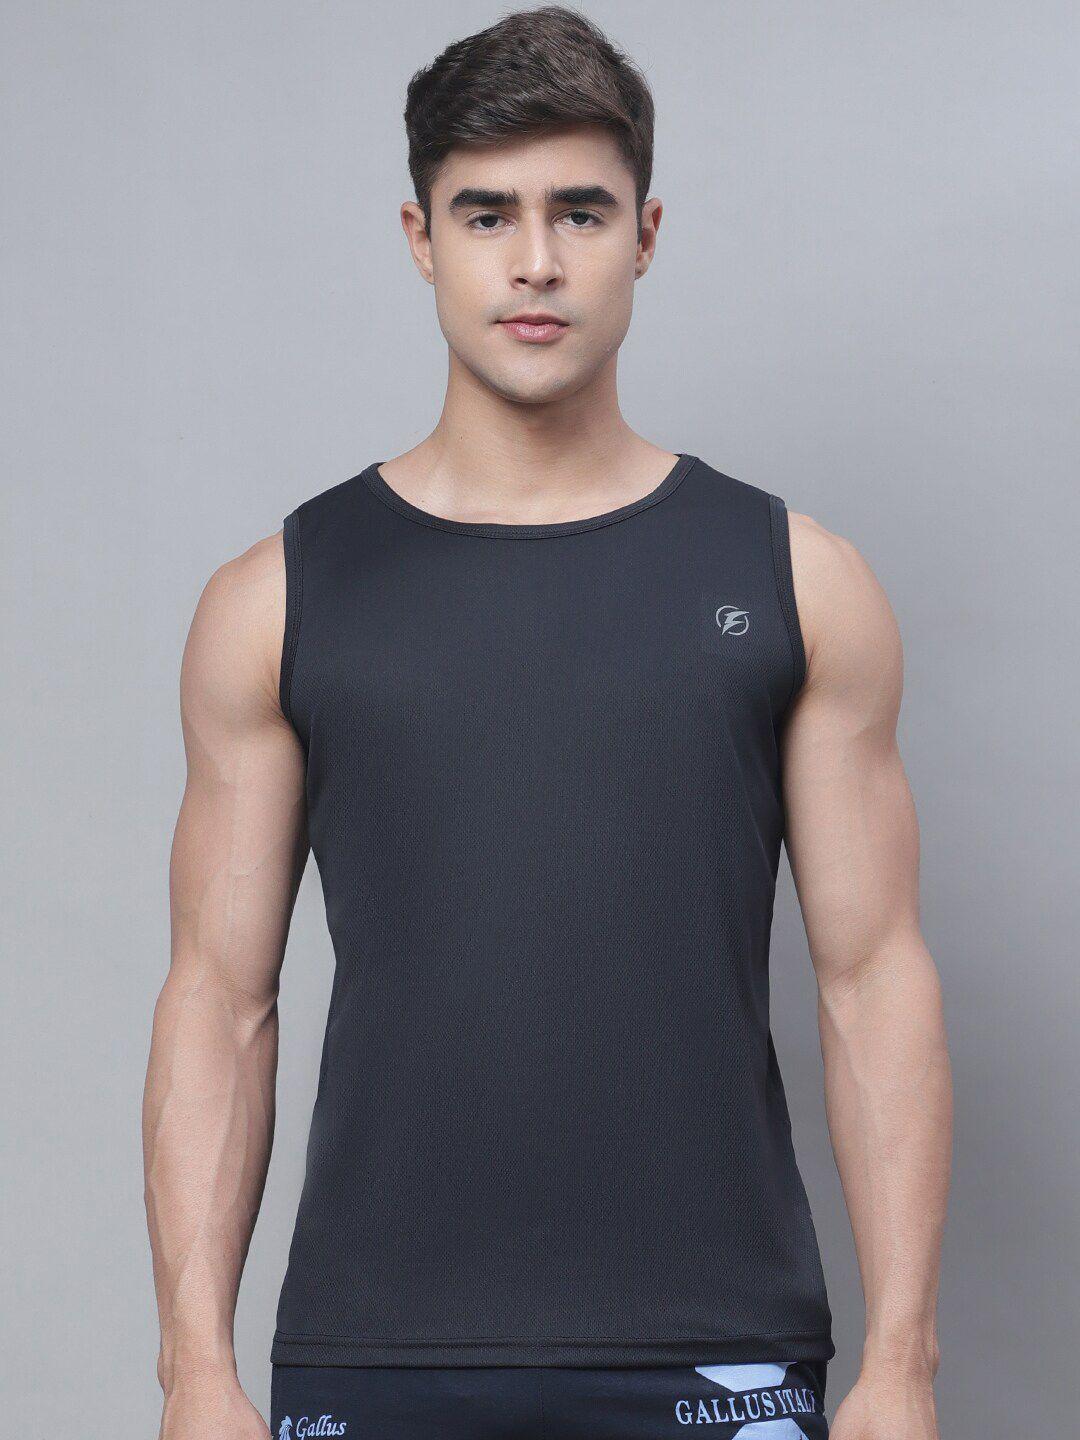 friskers round neck sleeveless anti odor breathable skin friendly sports t-shirt